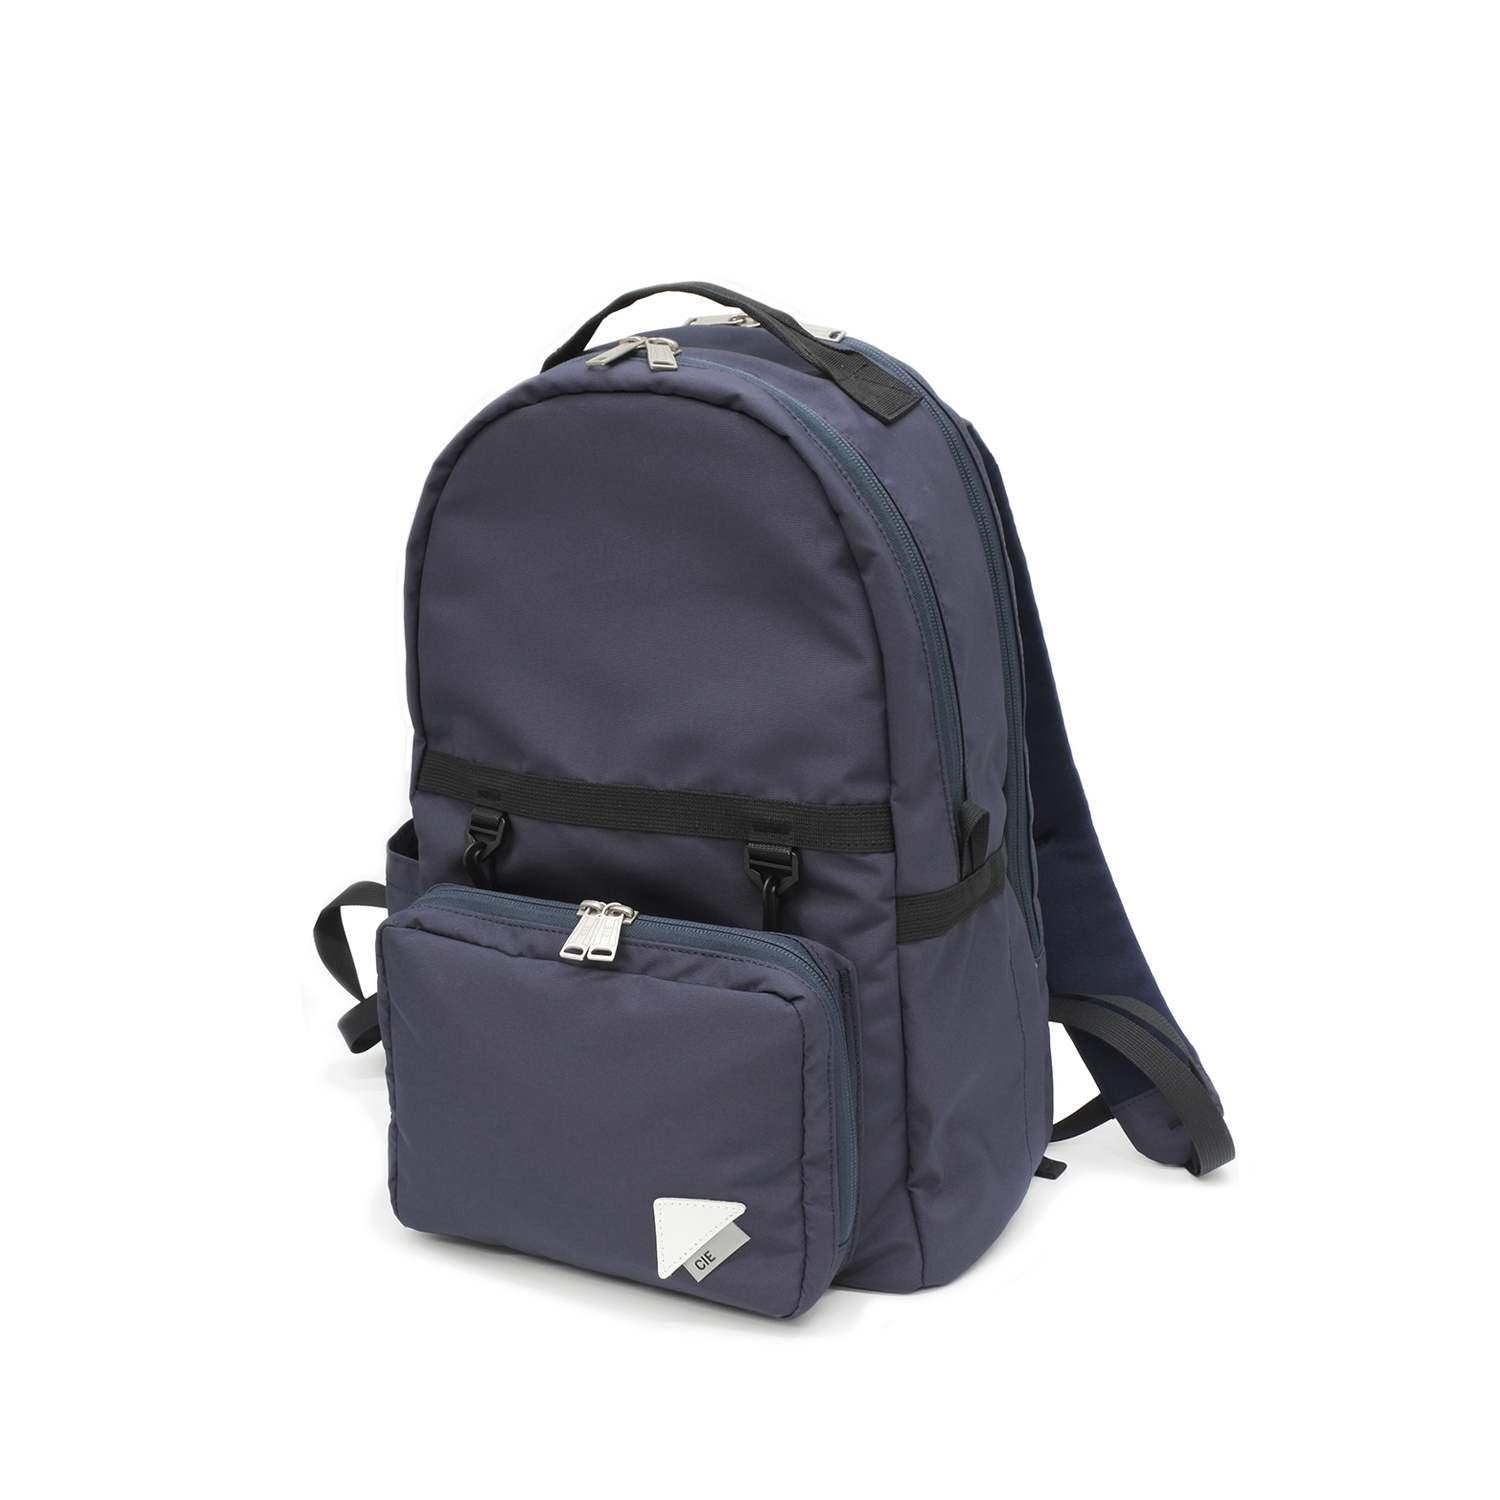 CIE - WEATHER DAYPACK for TOYOOKA KABAN collaboration / LIALWORKS